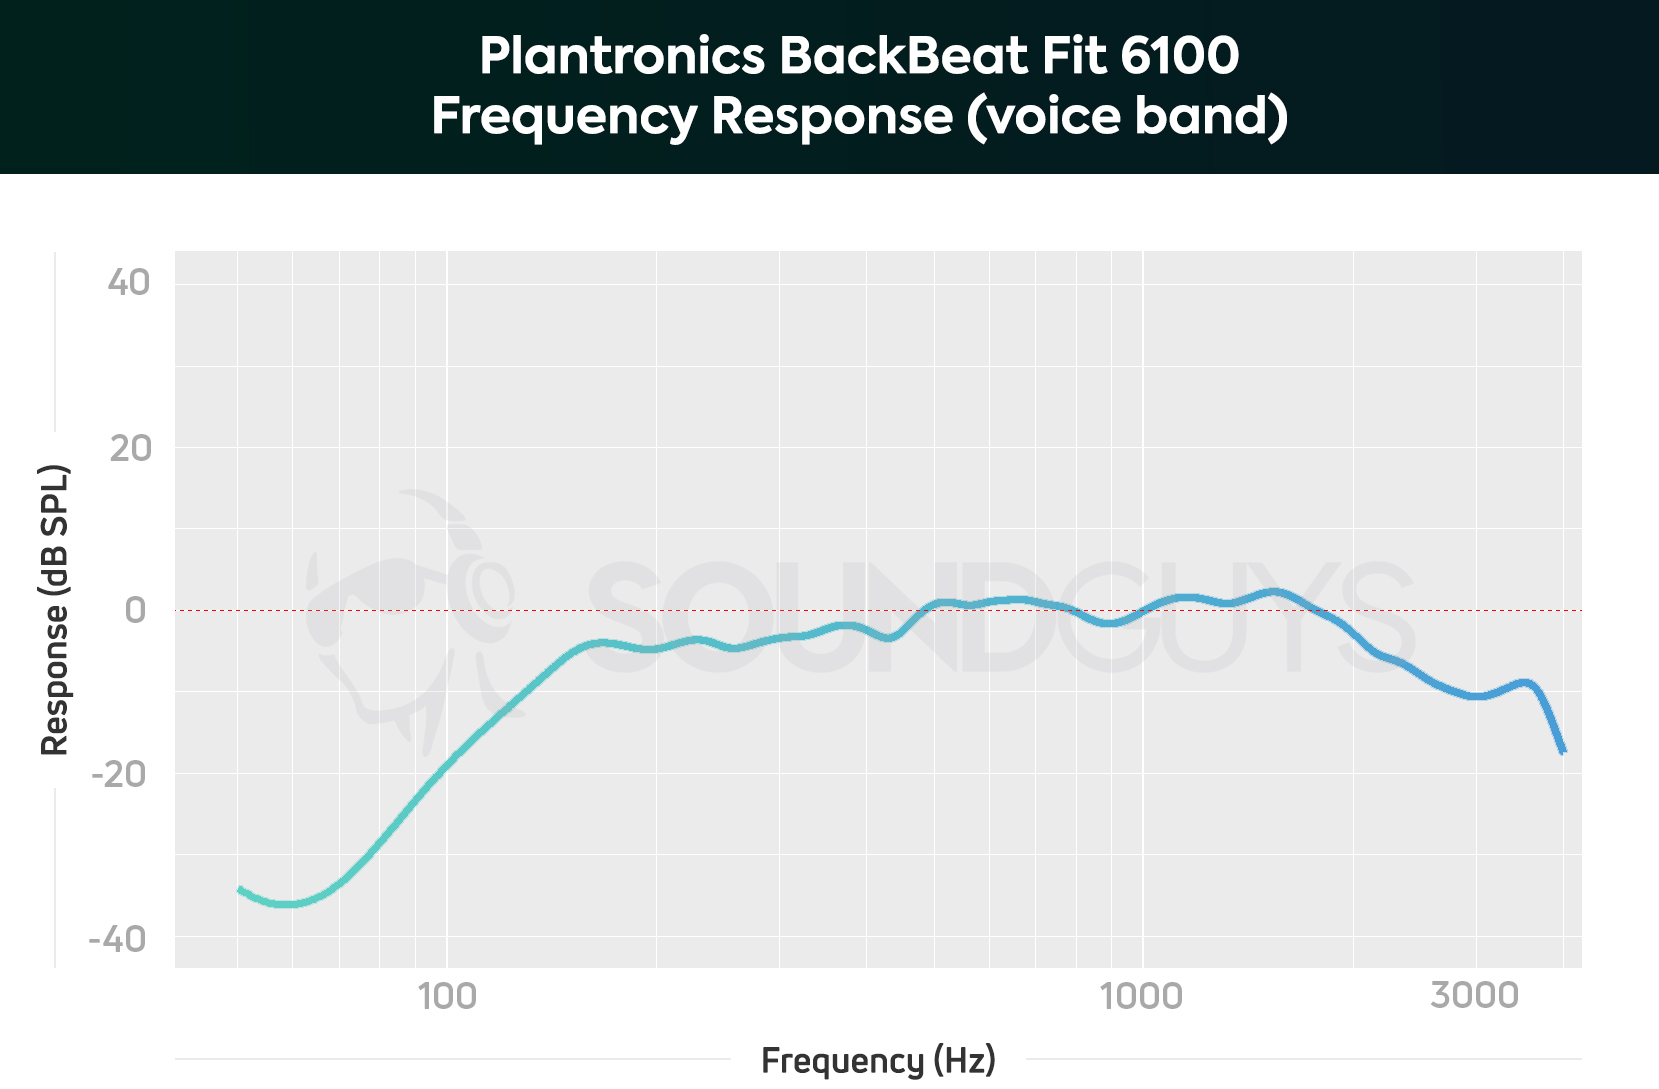 A chart depicting the Plantronics BackBeat Fit 6100 workout headphones' microphone frequency response, limited to the human voice band.